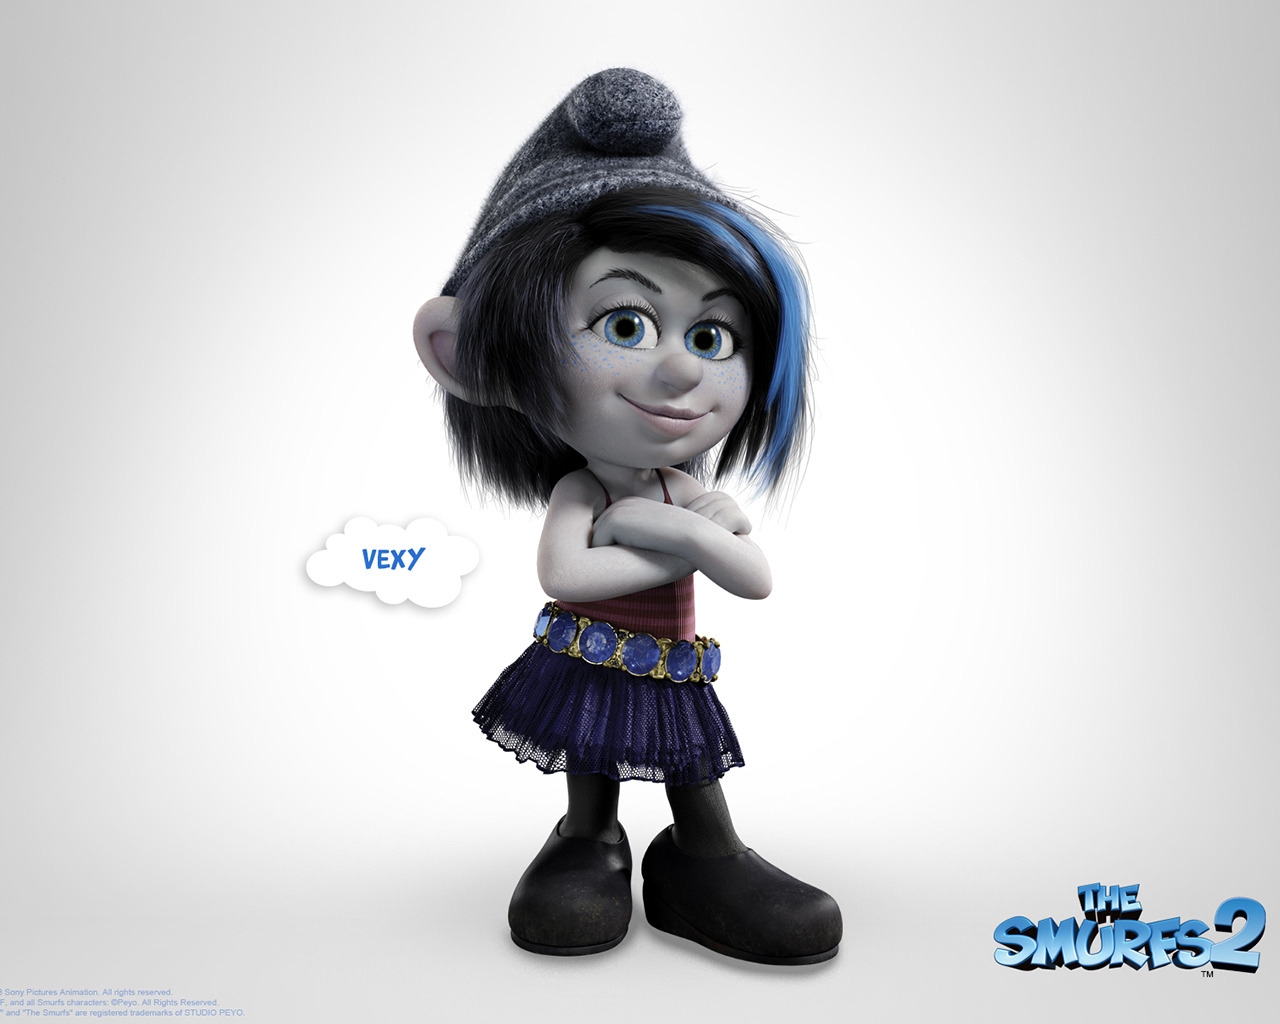 Vexy The Smurfs 2 for 1280 x 1024 resolution